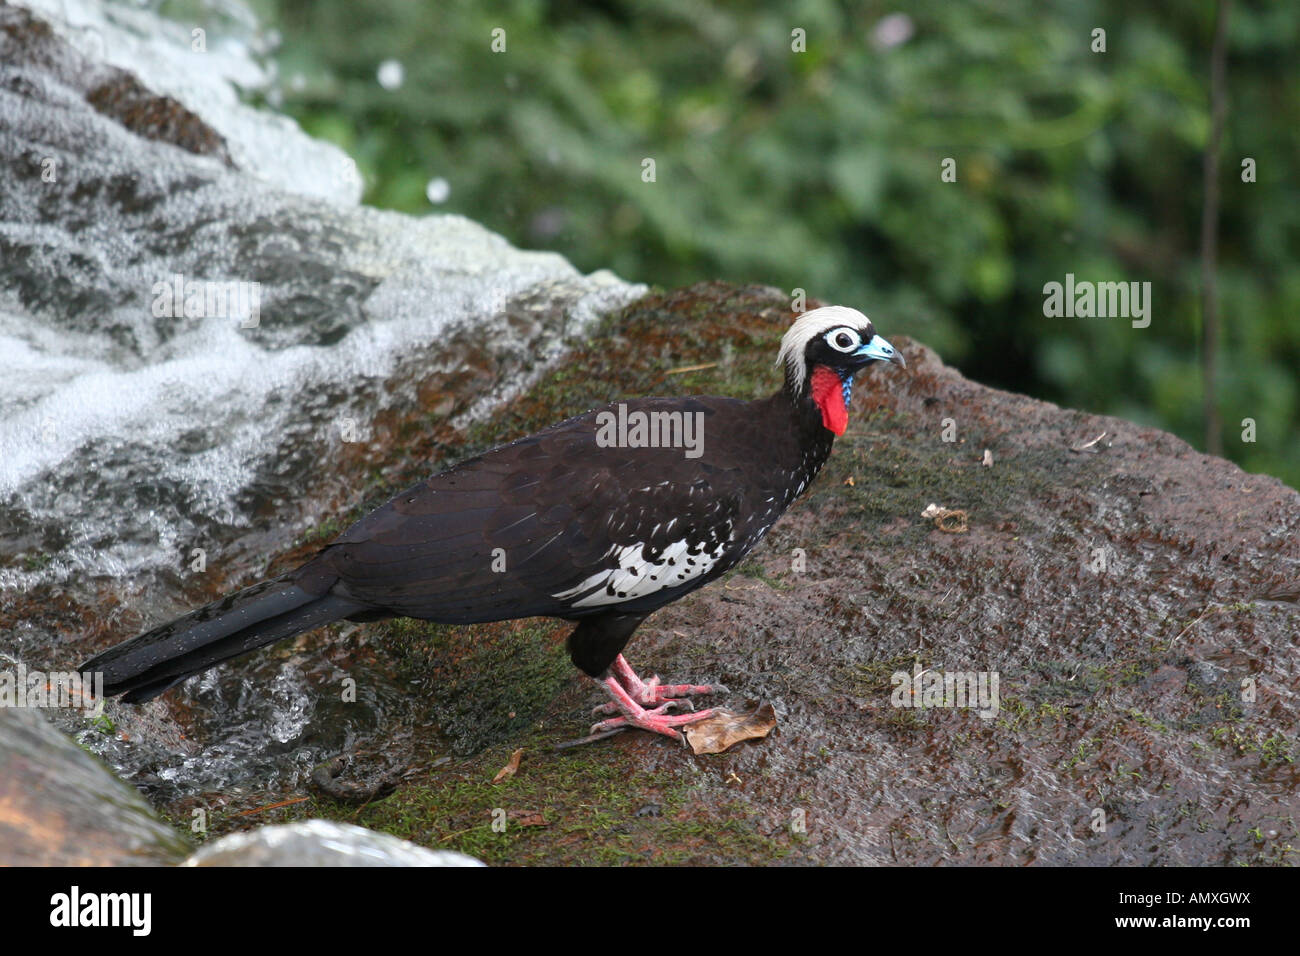 Black fronted piping guan Stock Photo